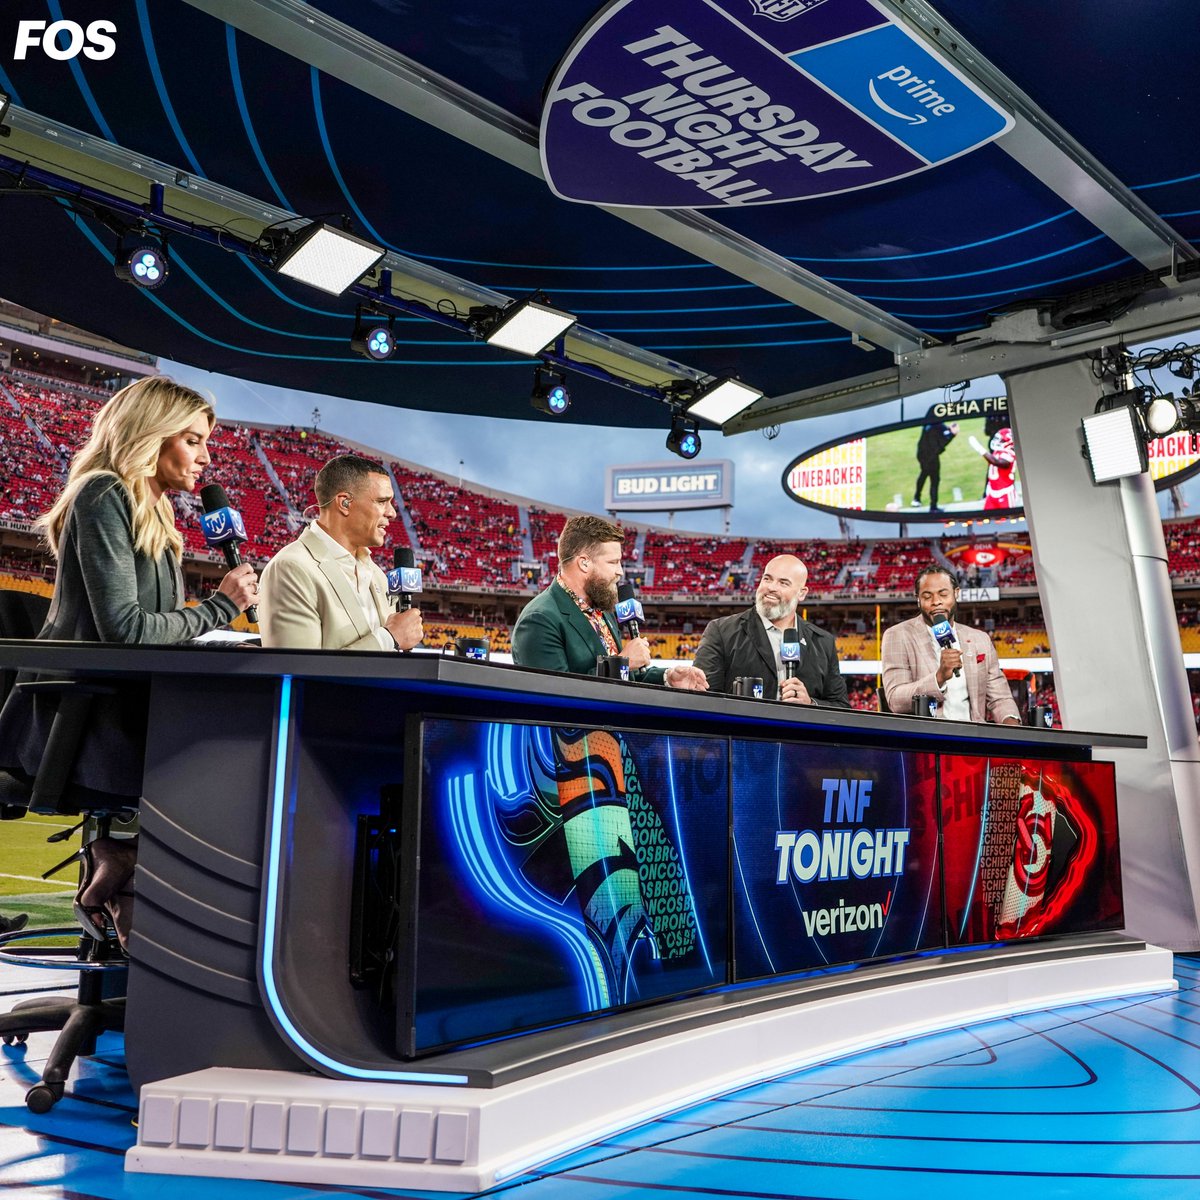 Amazon is reportedly in talks to invest in the bankrupt RSN operator Diamond Sports Group. DSG carries games through its Bally Sports channels for more than 40 teams — and a deal with Amazon would eventually put those broadcasts on Prime Video. MORE » gofos.co/3NzEOiS